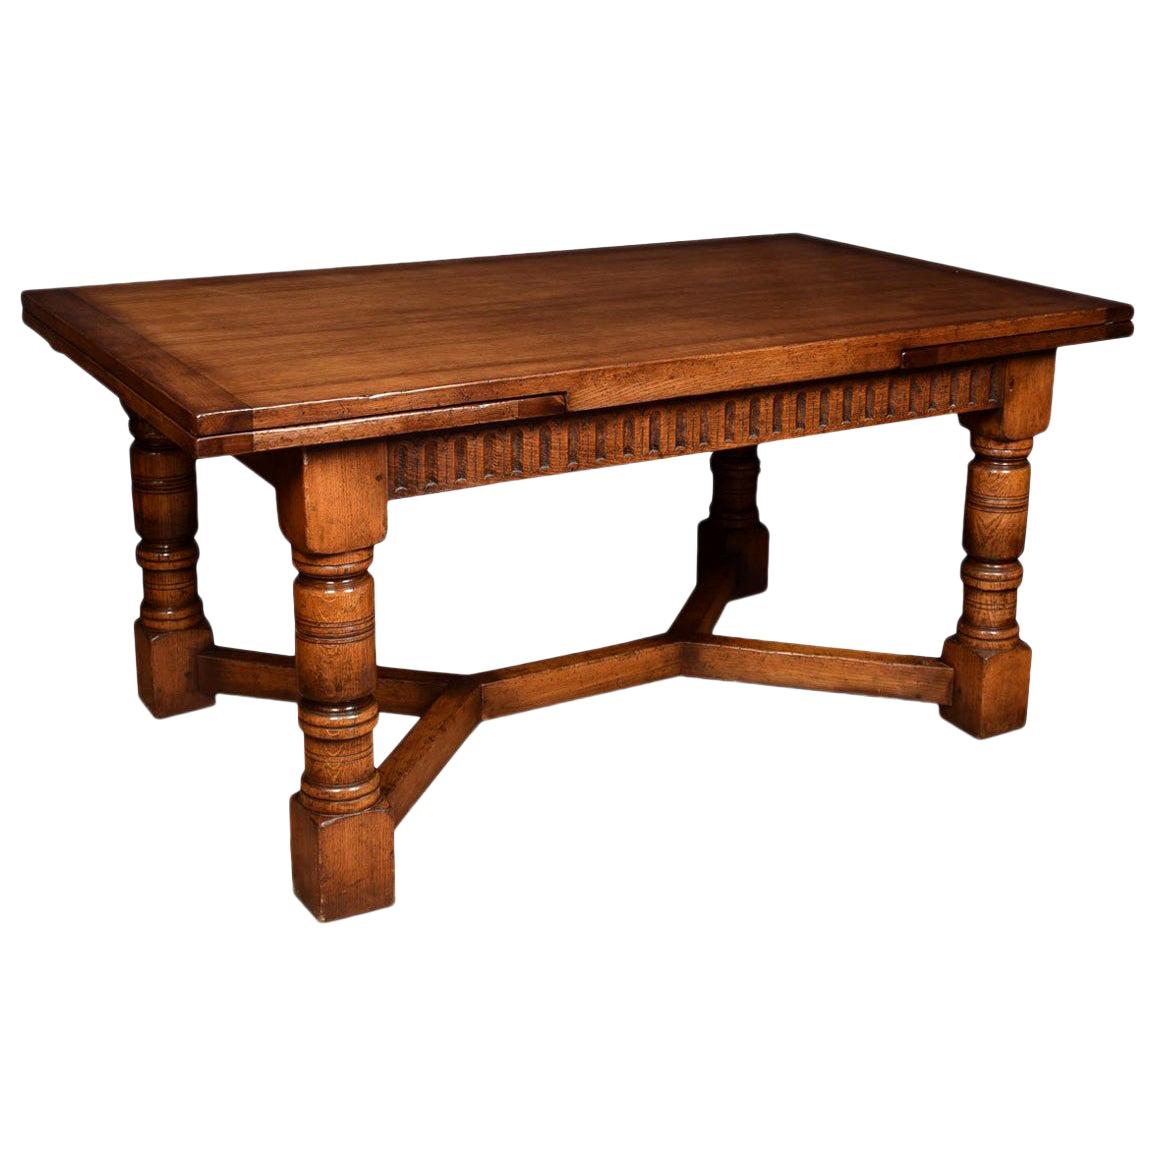 Oak draw leaf refectory table, the rectangular solid oak top above two pullout / pull-out ends, to the ed frieze above massive turned gun barrel legs joined by a double Y-shaped stretcher.
Dimensions:
Height 30.5 inches
Width 66 inches when open